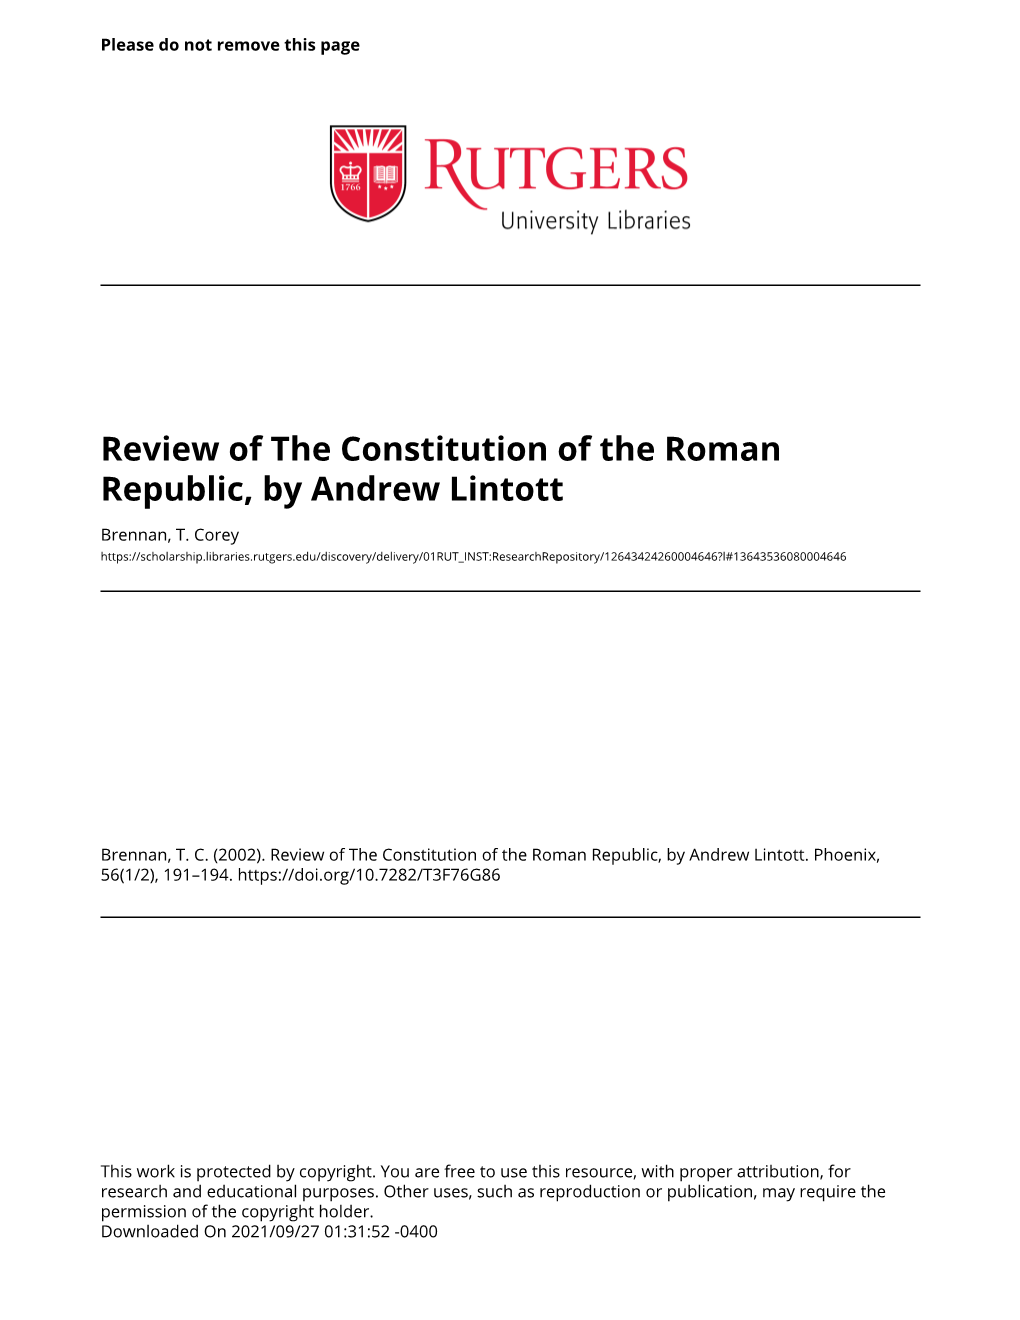 Review of the Constitution of the Roman Republic, by Andrew Lintott